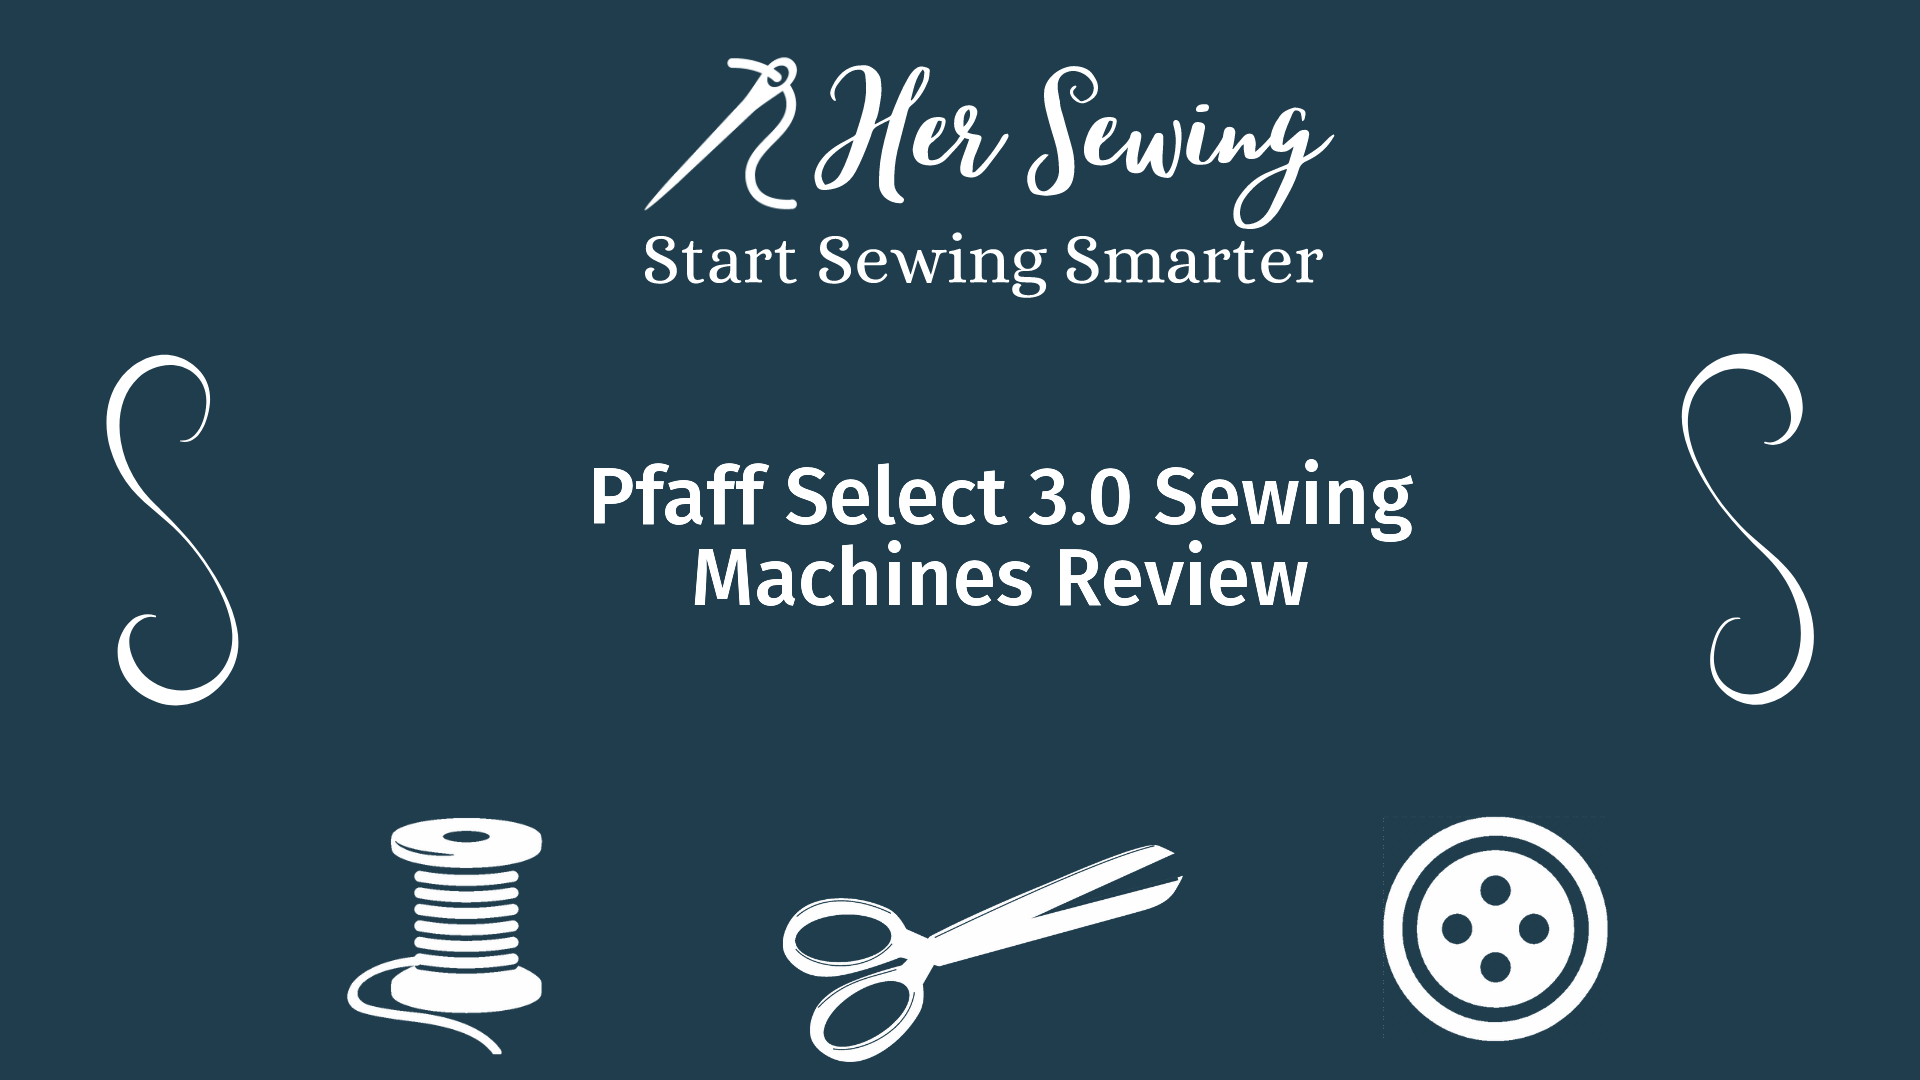 Pfaff Select 3.0 Sewing Machines Review